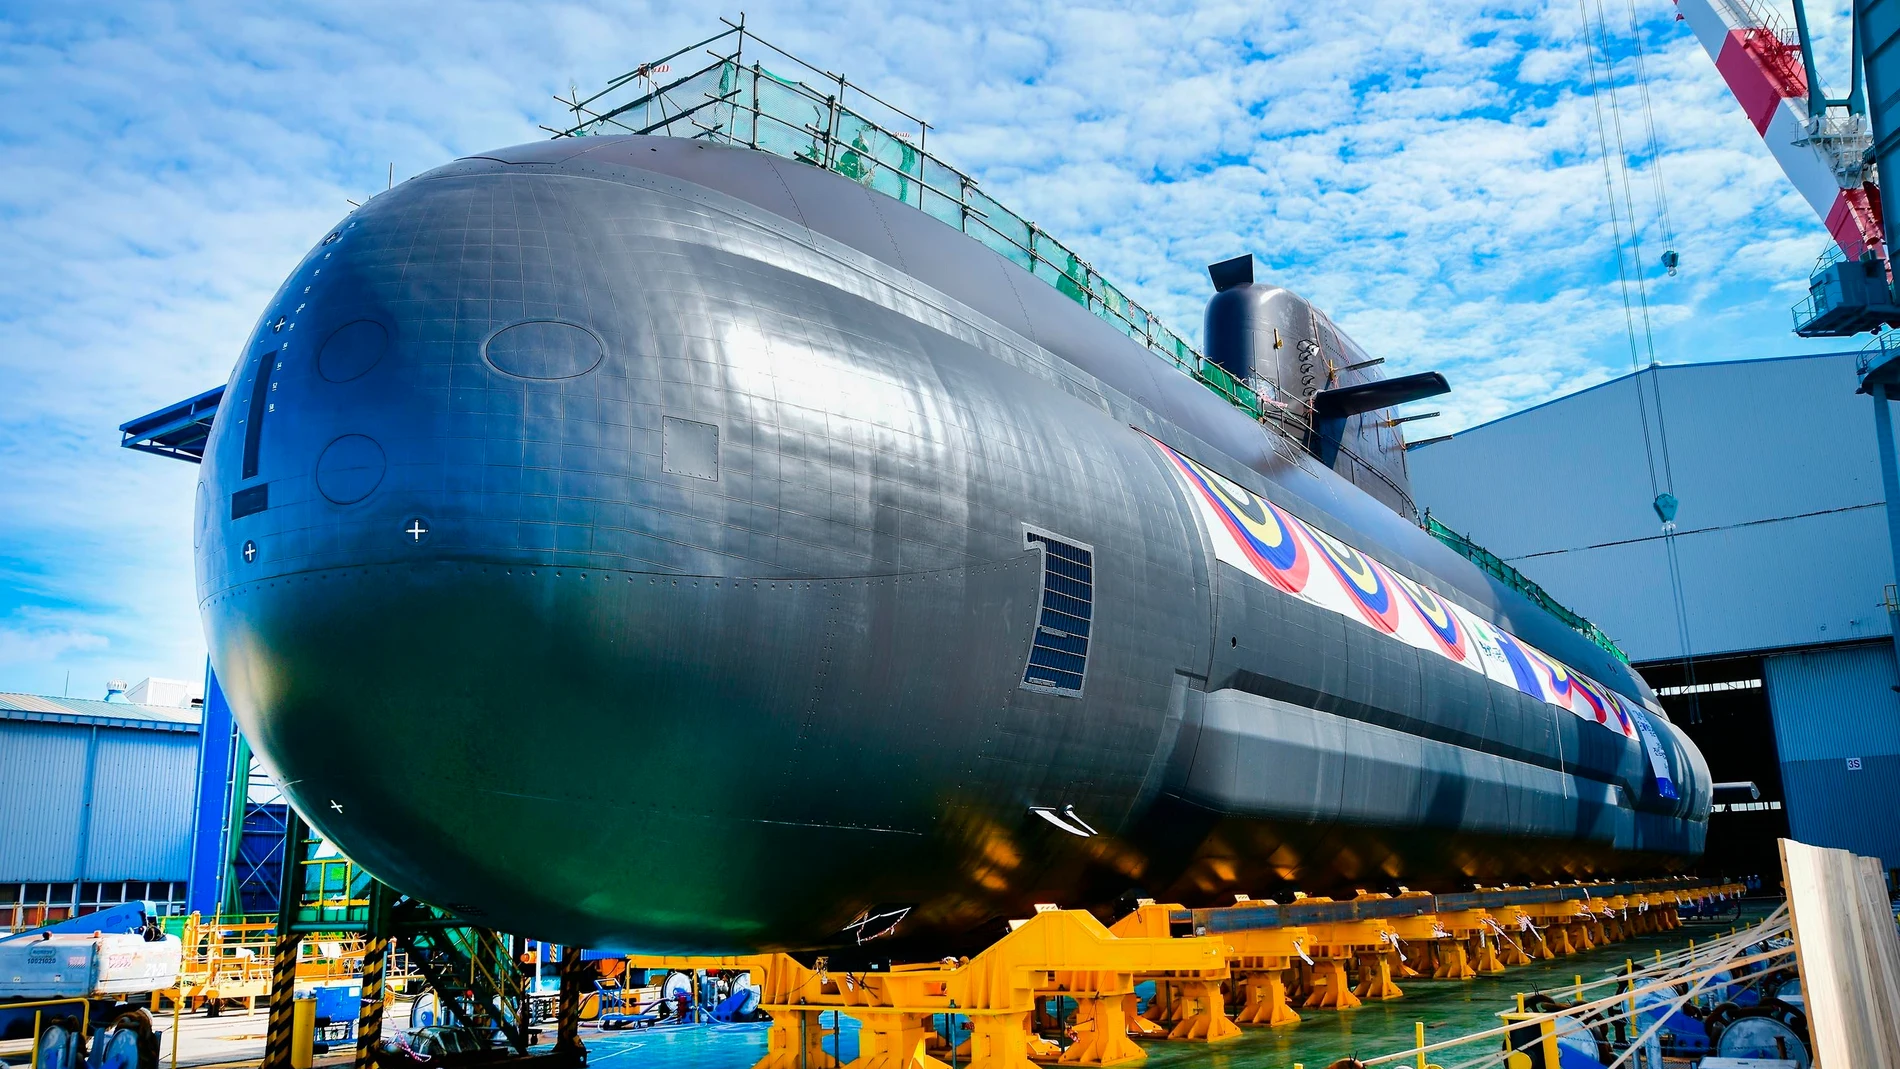 Ulsan (Korea, Republic Of), 28/09/2021.- An undated handout photo made available by the Republic of Korea Navy shows South Korea's new 3,000-ton homegrown submarine, Shin Chae-ho, in Ulsan, South Korea (issued 28 September 2021). A launch ceremony for the new submarine, capable of firing submarine-launched ballistic missiles and named after a prominent Korean independence activist, Shin Chae-ho, will take place at the shipyard of Hyundai Heavy Industries Co. in the southeastern city of Ulsan later in the day, according to the military. (Corea del Norte, Corea del Sur) EFE/EPA/REPUBLIC OF KOREA NAVY / HANDOUT SOUTH KOREA OUT HANDOUT EDITORIAL USE ONLY/NO SALES